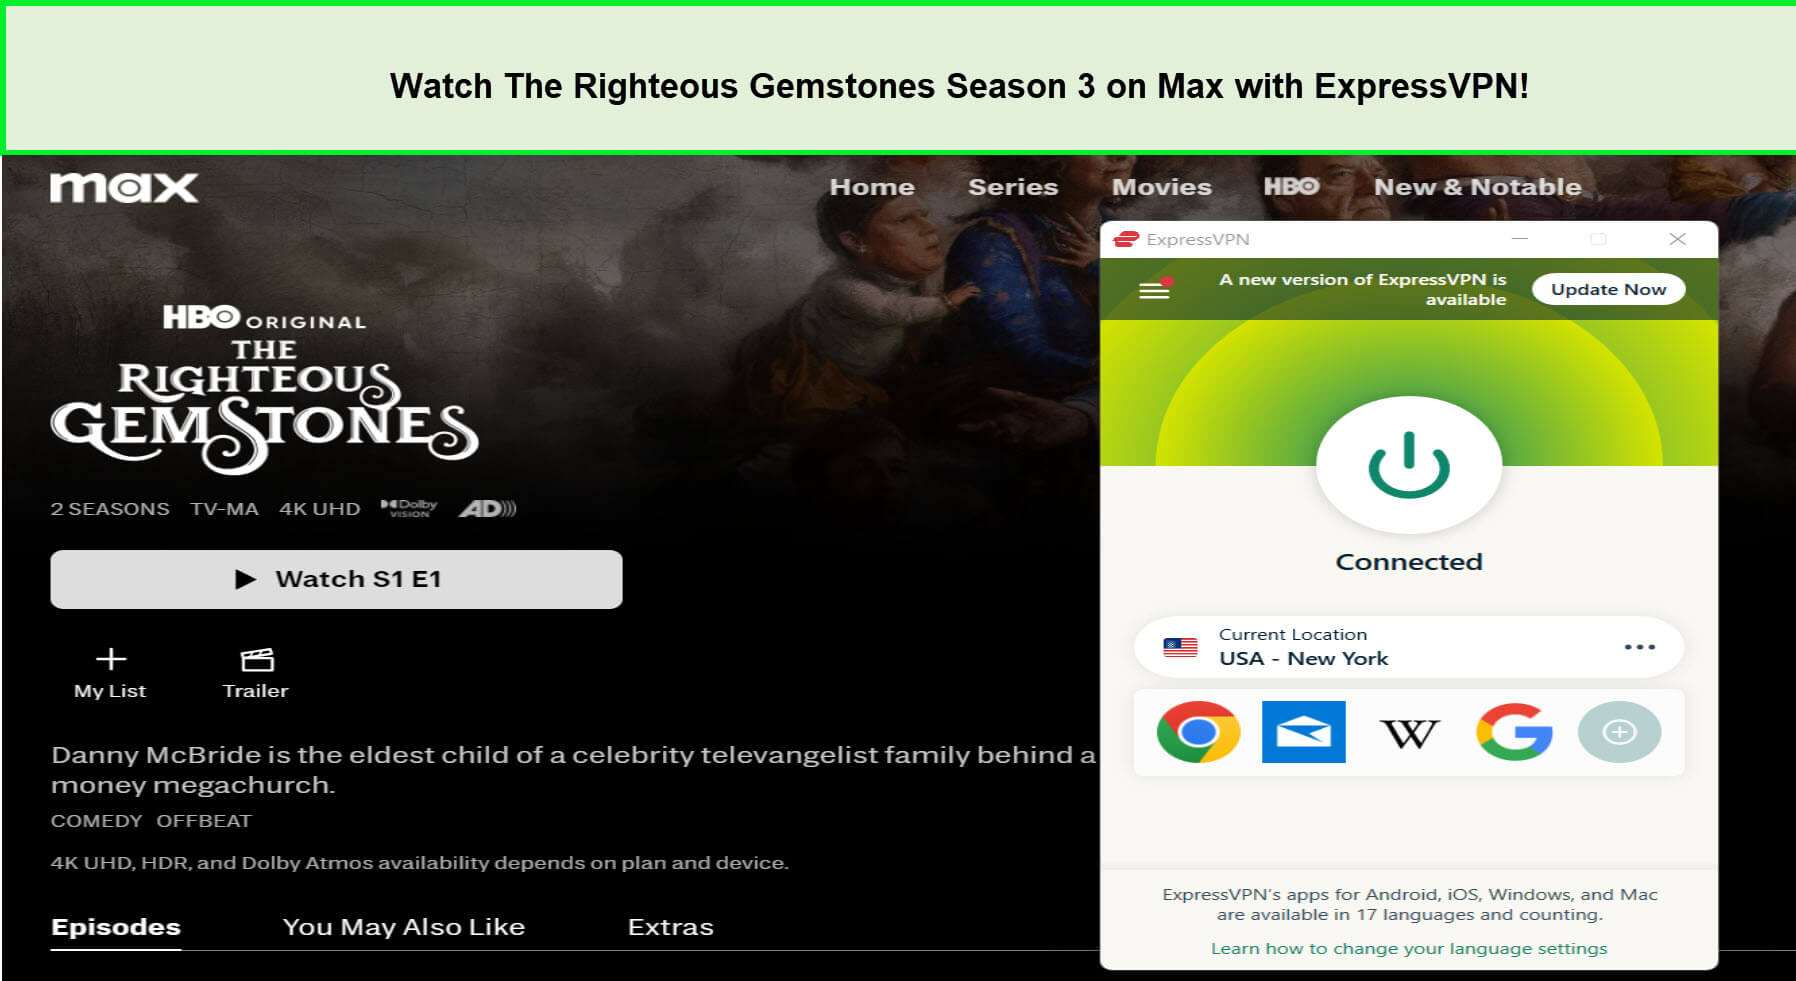 watch-The-Righteous-Gemstones-season-3-in-UK-on-Max-with-expressvpn